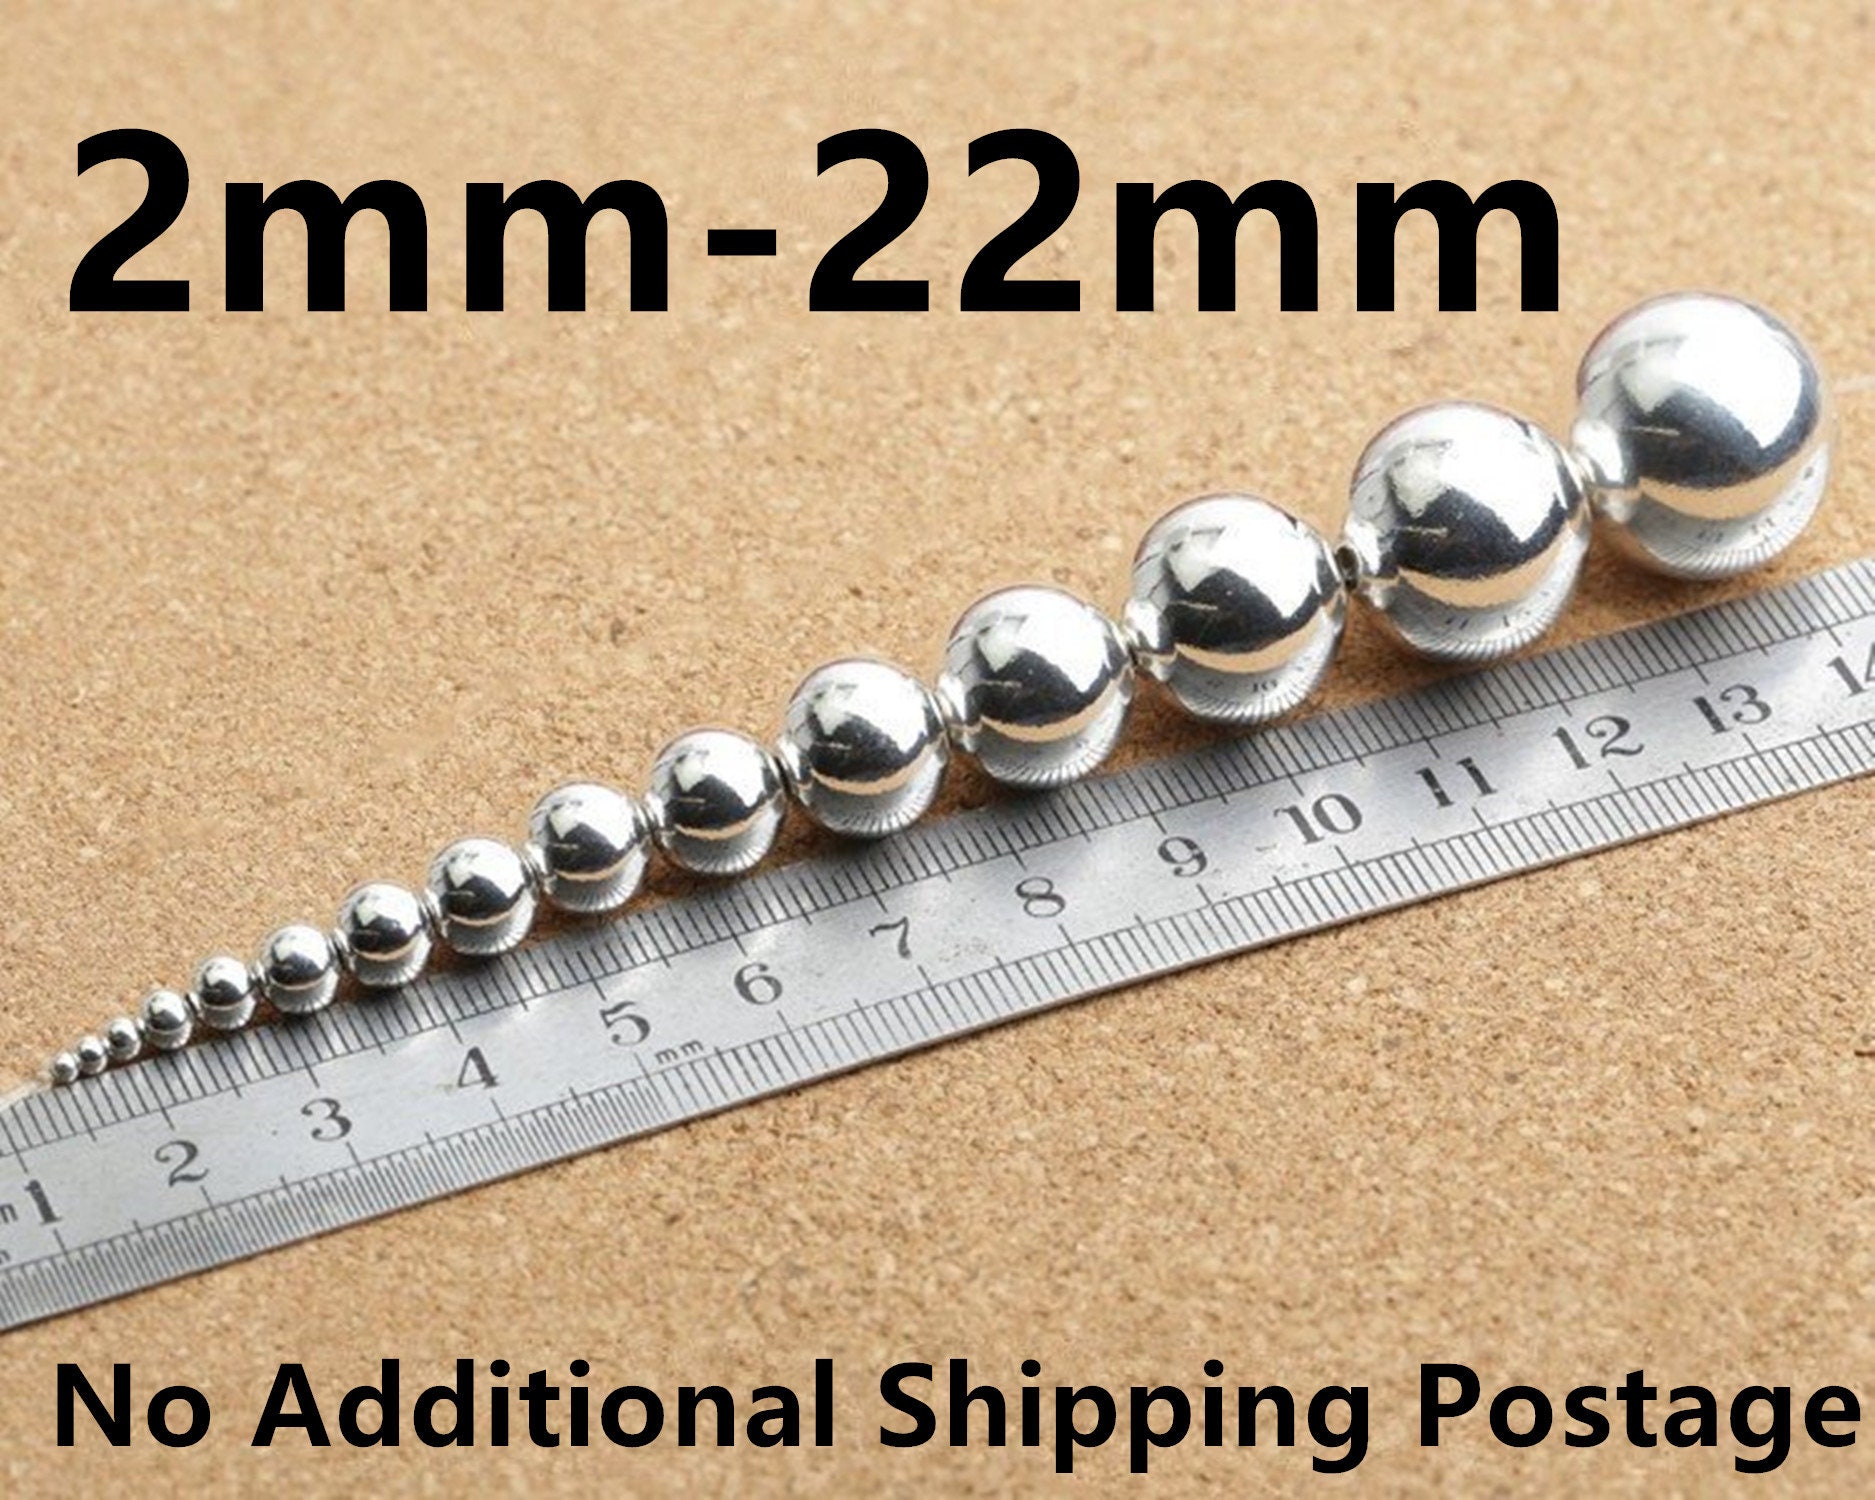 Bead, sterling silver, 3mm seamless round. Sold per pkg of 50